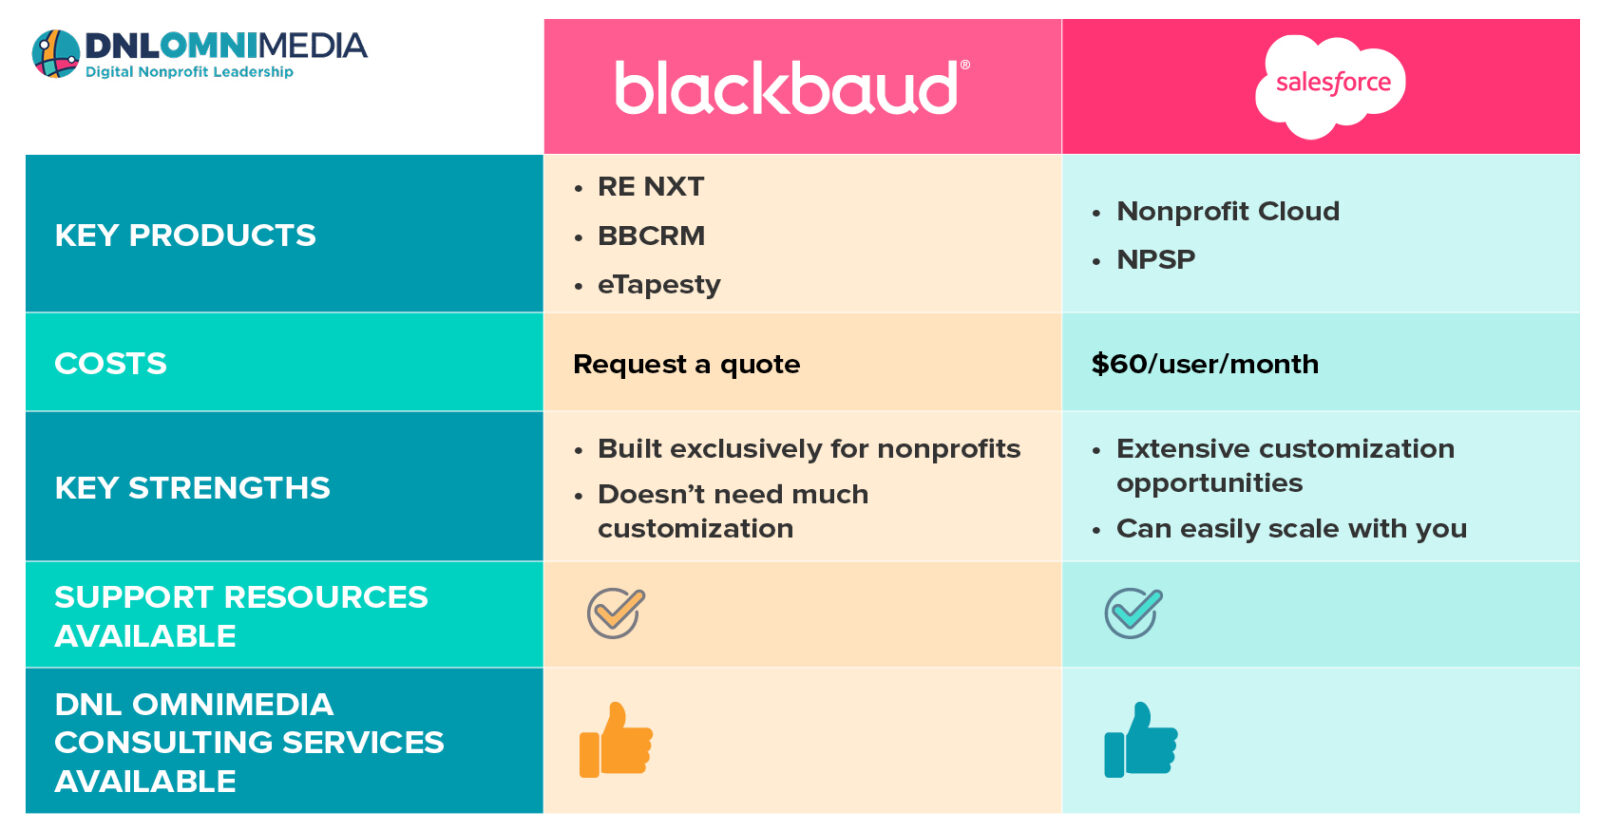 The image sums up the text above, providing an overview of the comparison of Blackbaud vs. Salesforce.